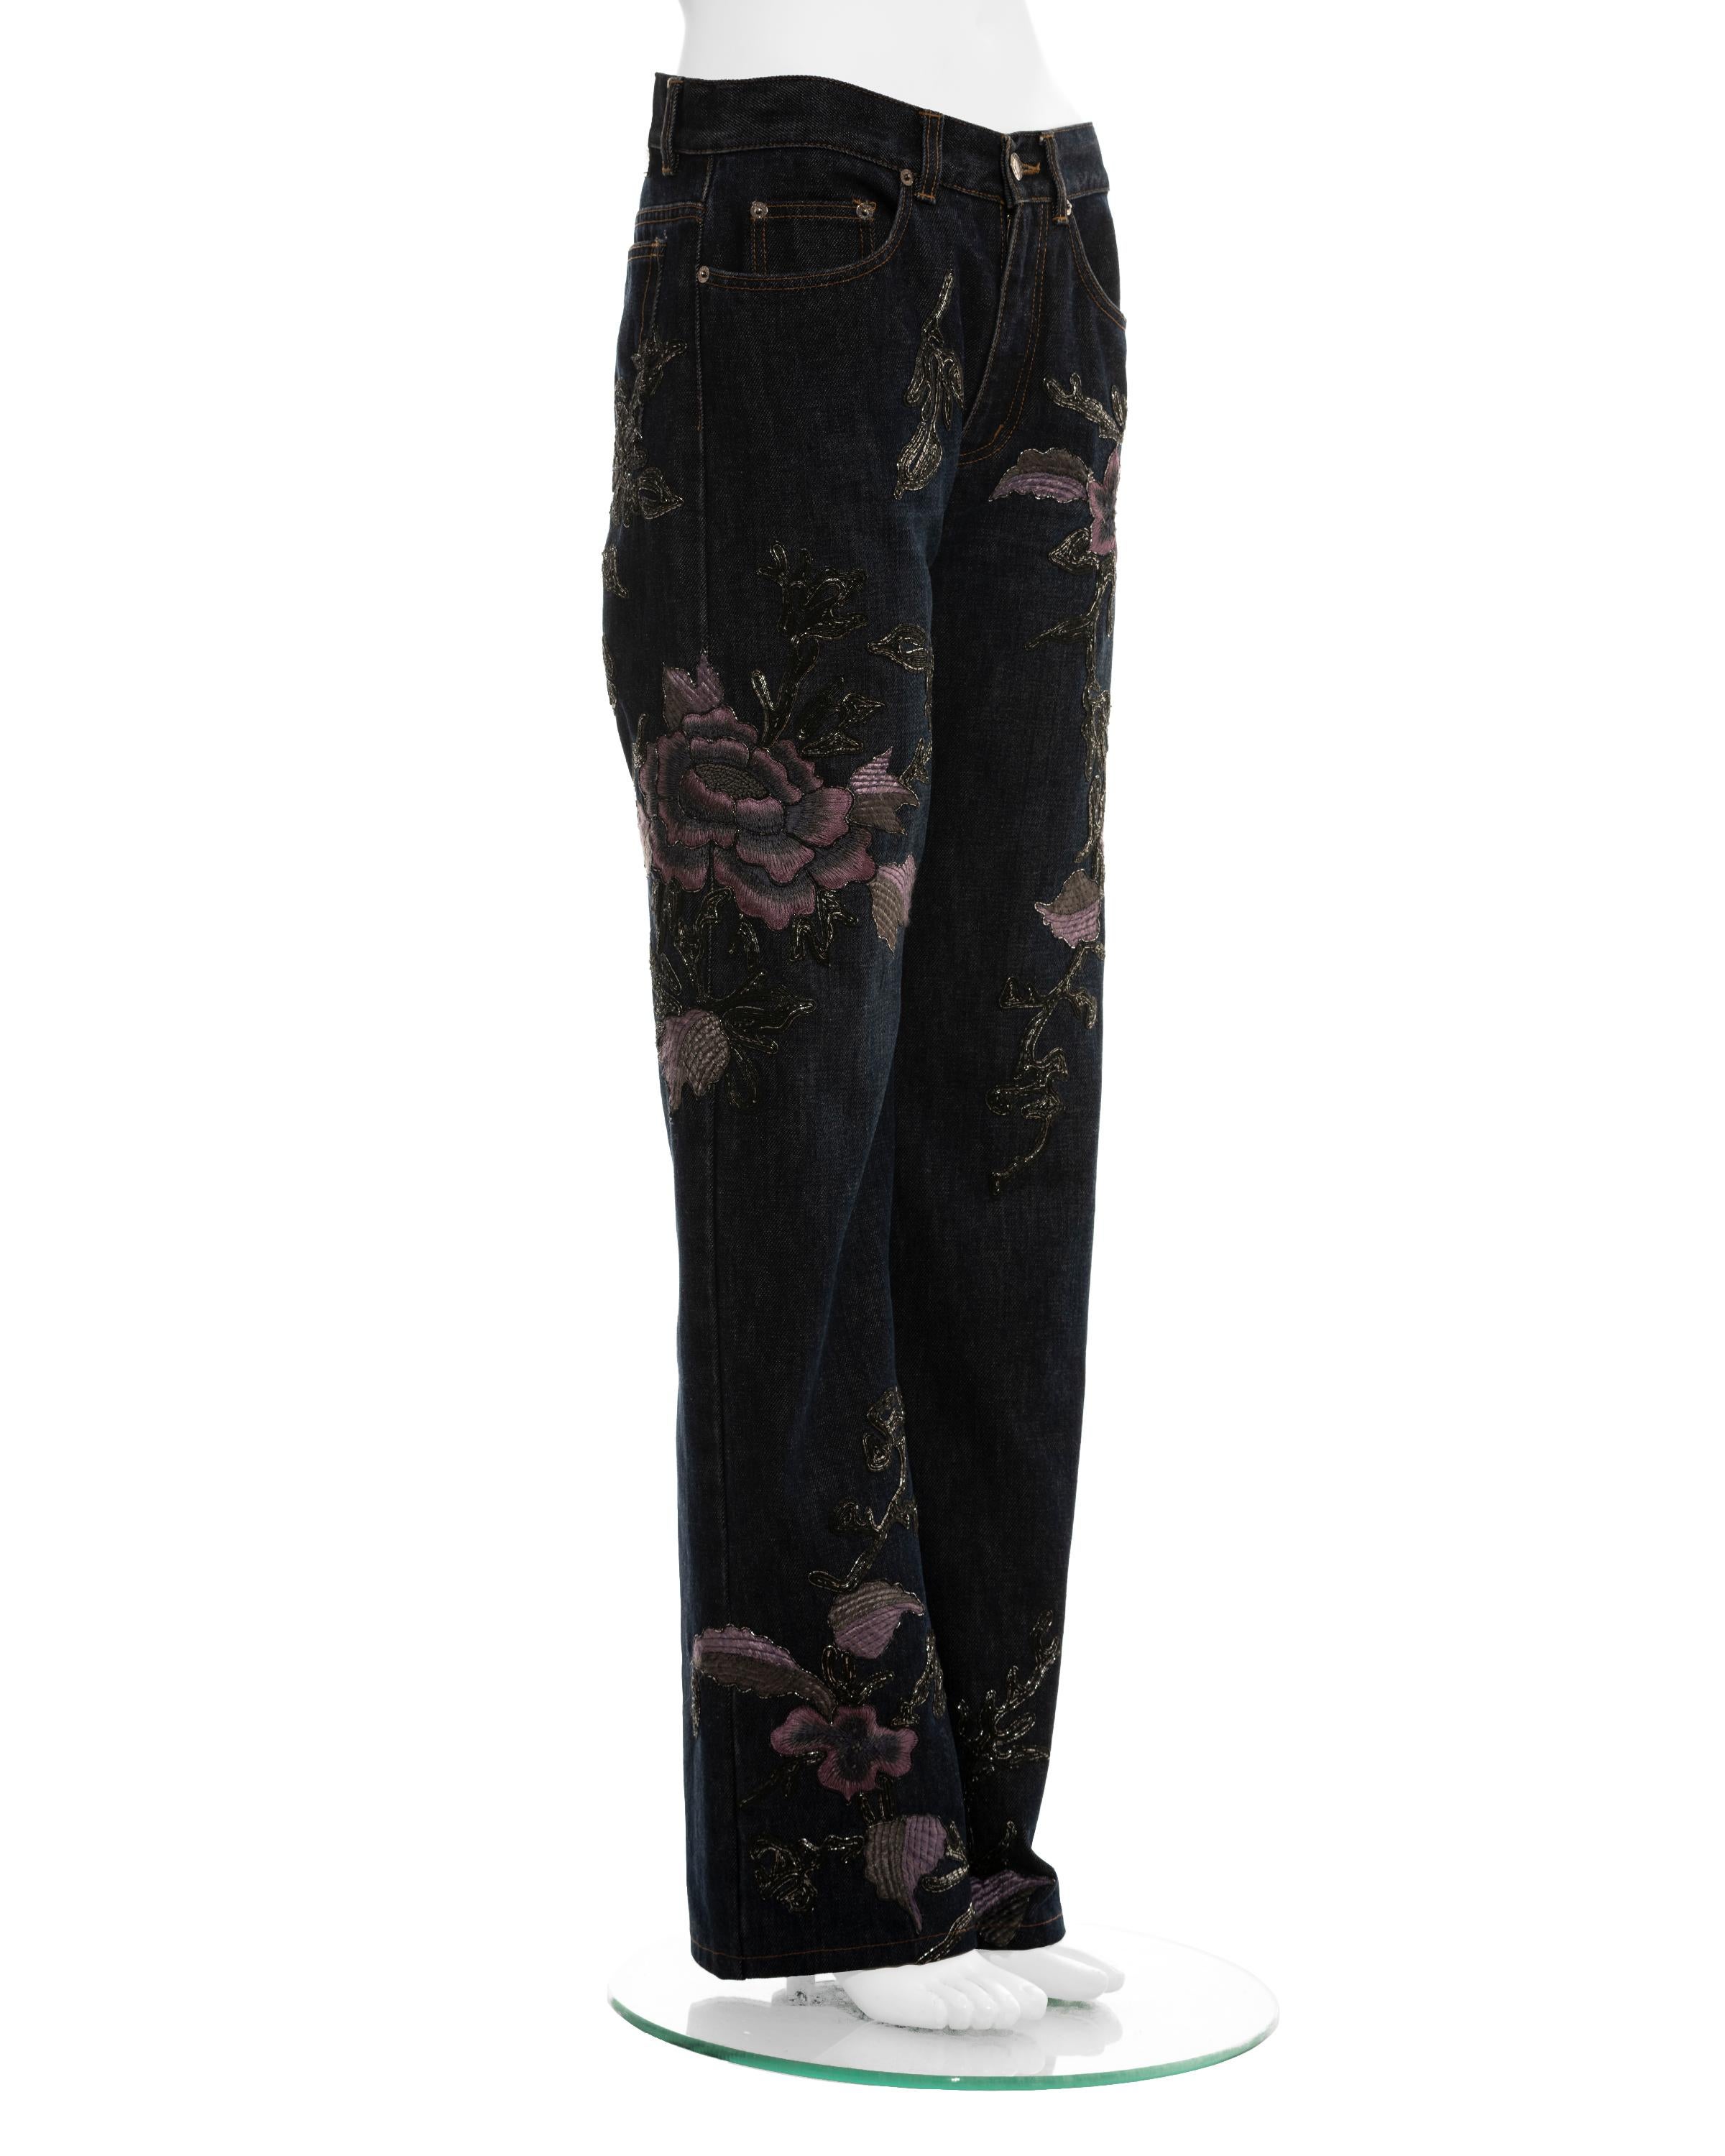 Gucci by Tom Ford denim jeans with floral embroidery, fw 1999